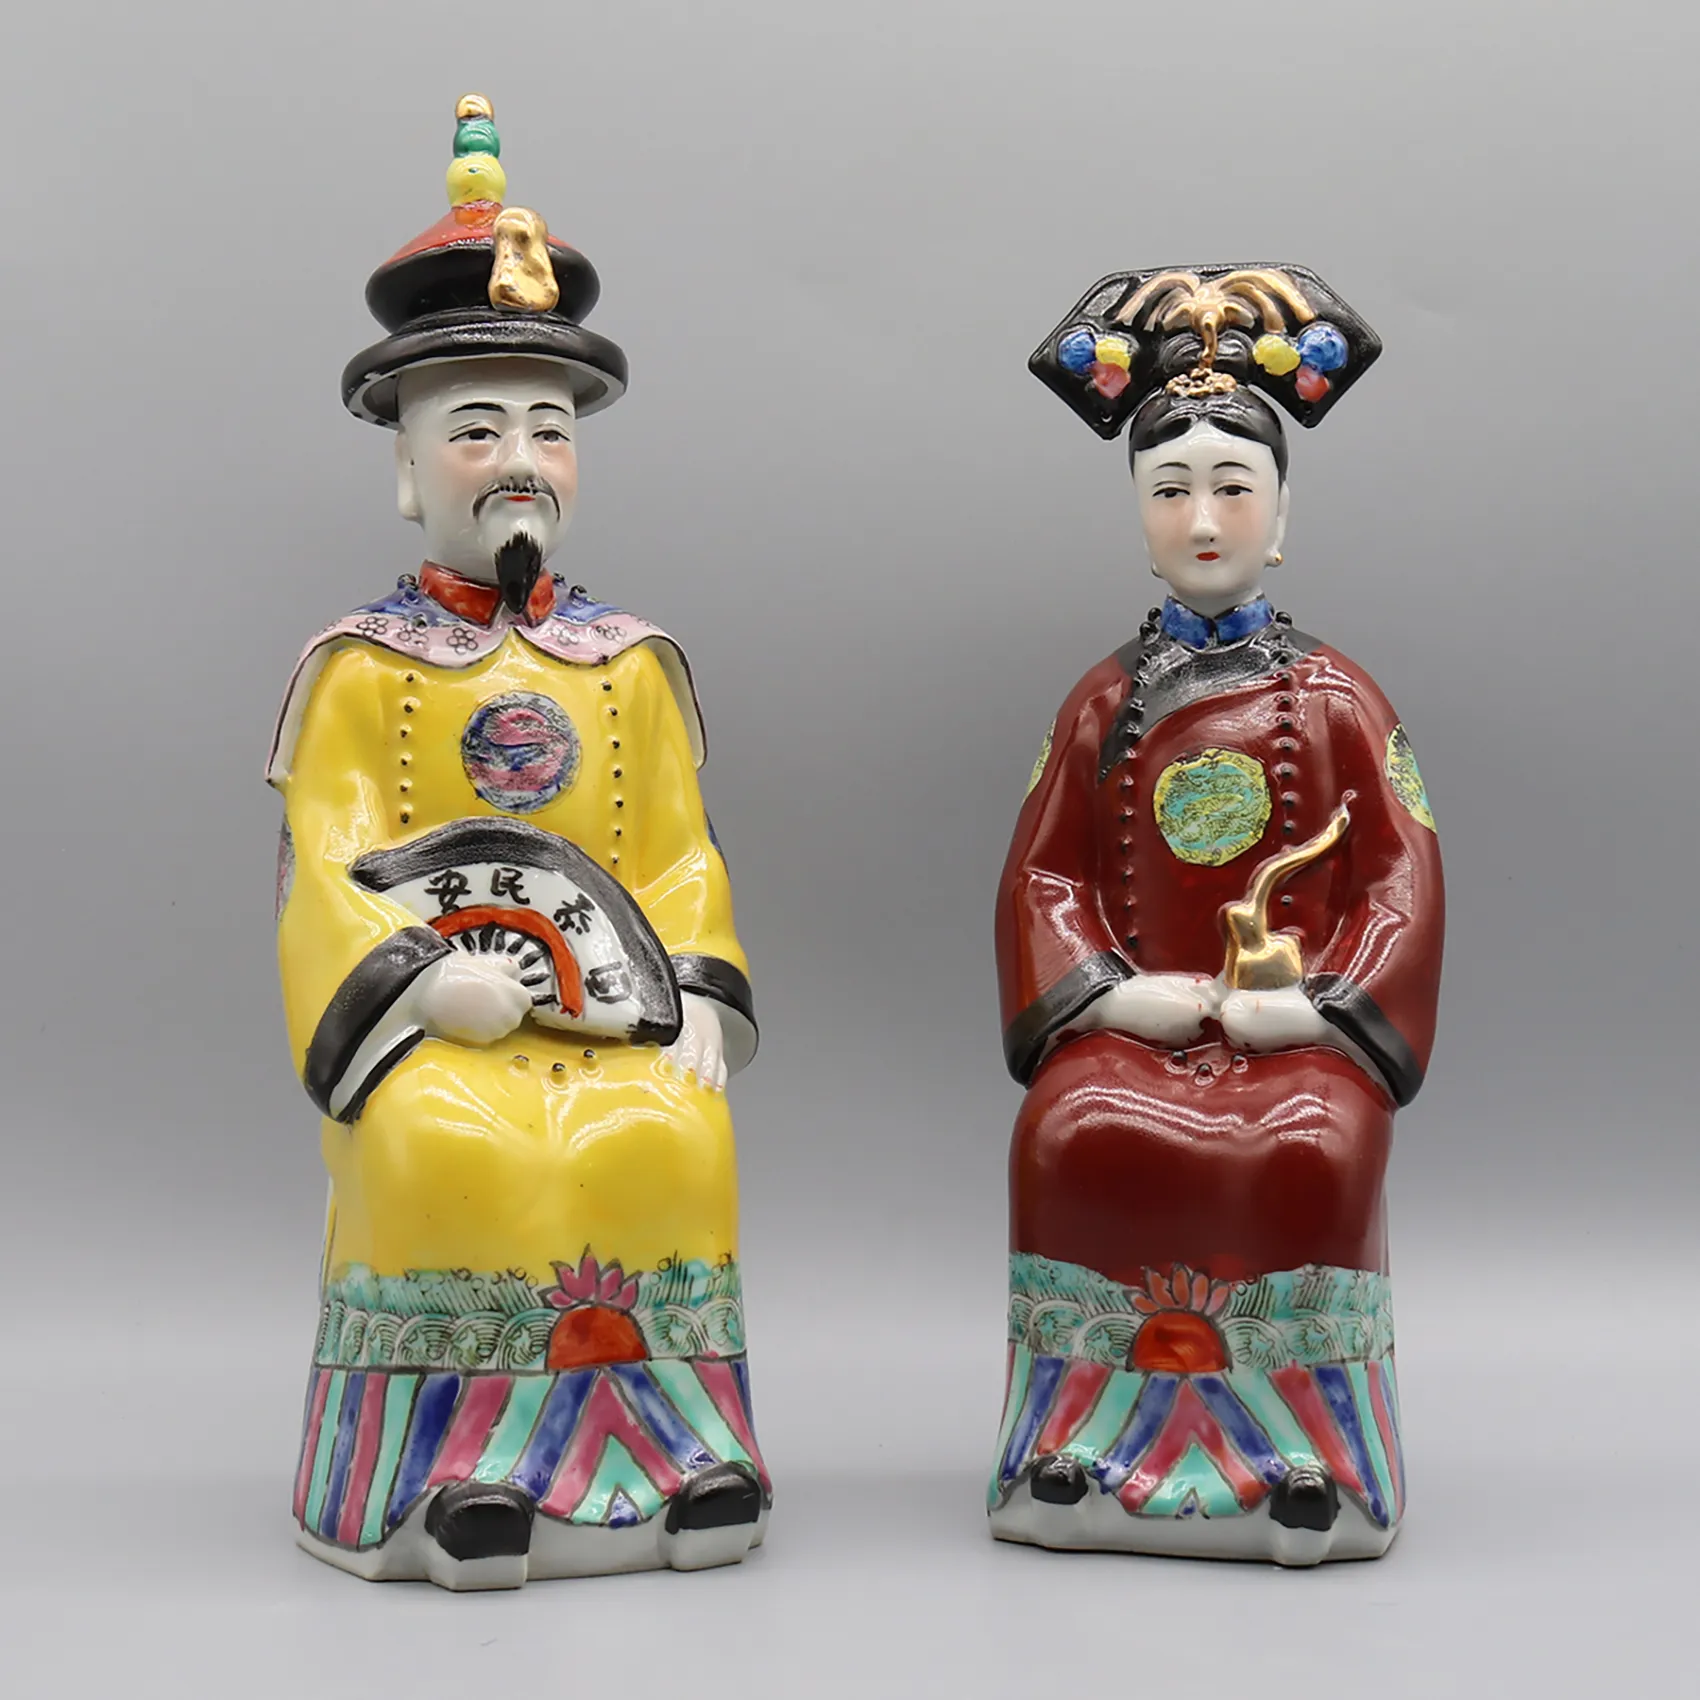 Hand Painted Ceramic Statues of Chinese Emperor and Empress in Qing Dynasty, Wedding Gift, Home Decoration